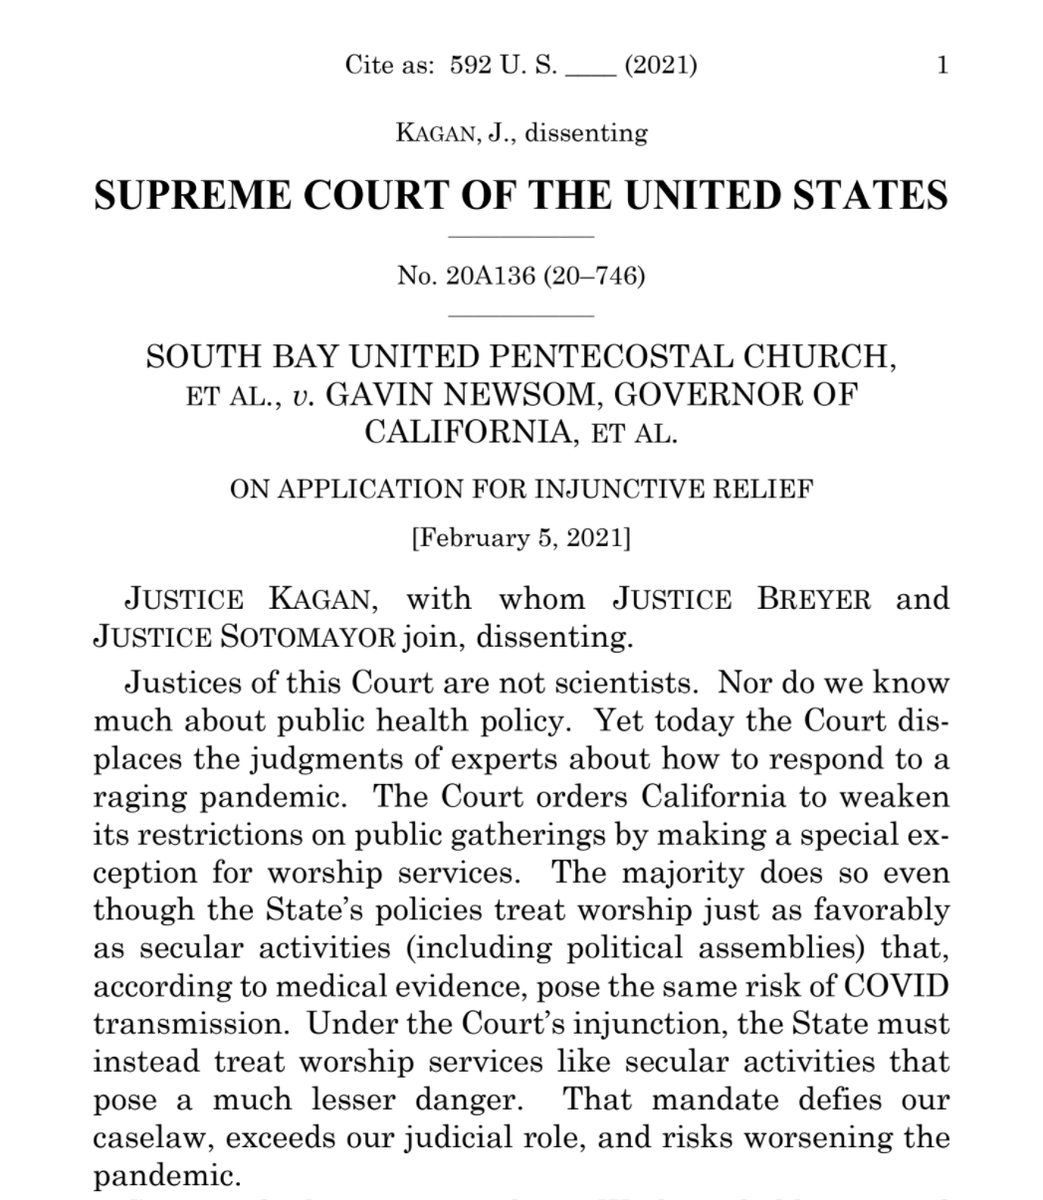 Kagan in the first line of her dissent decrying SCOTUS's micromanaging of states' response to the pandemic: "Justices of this Court are not scientists."